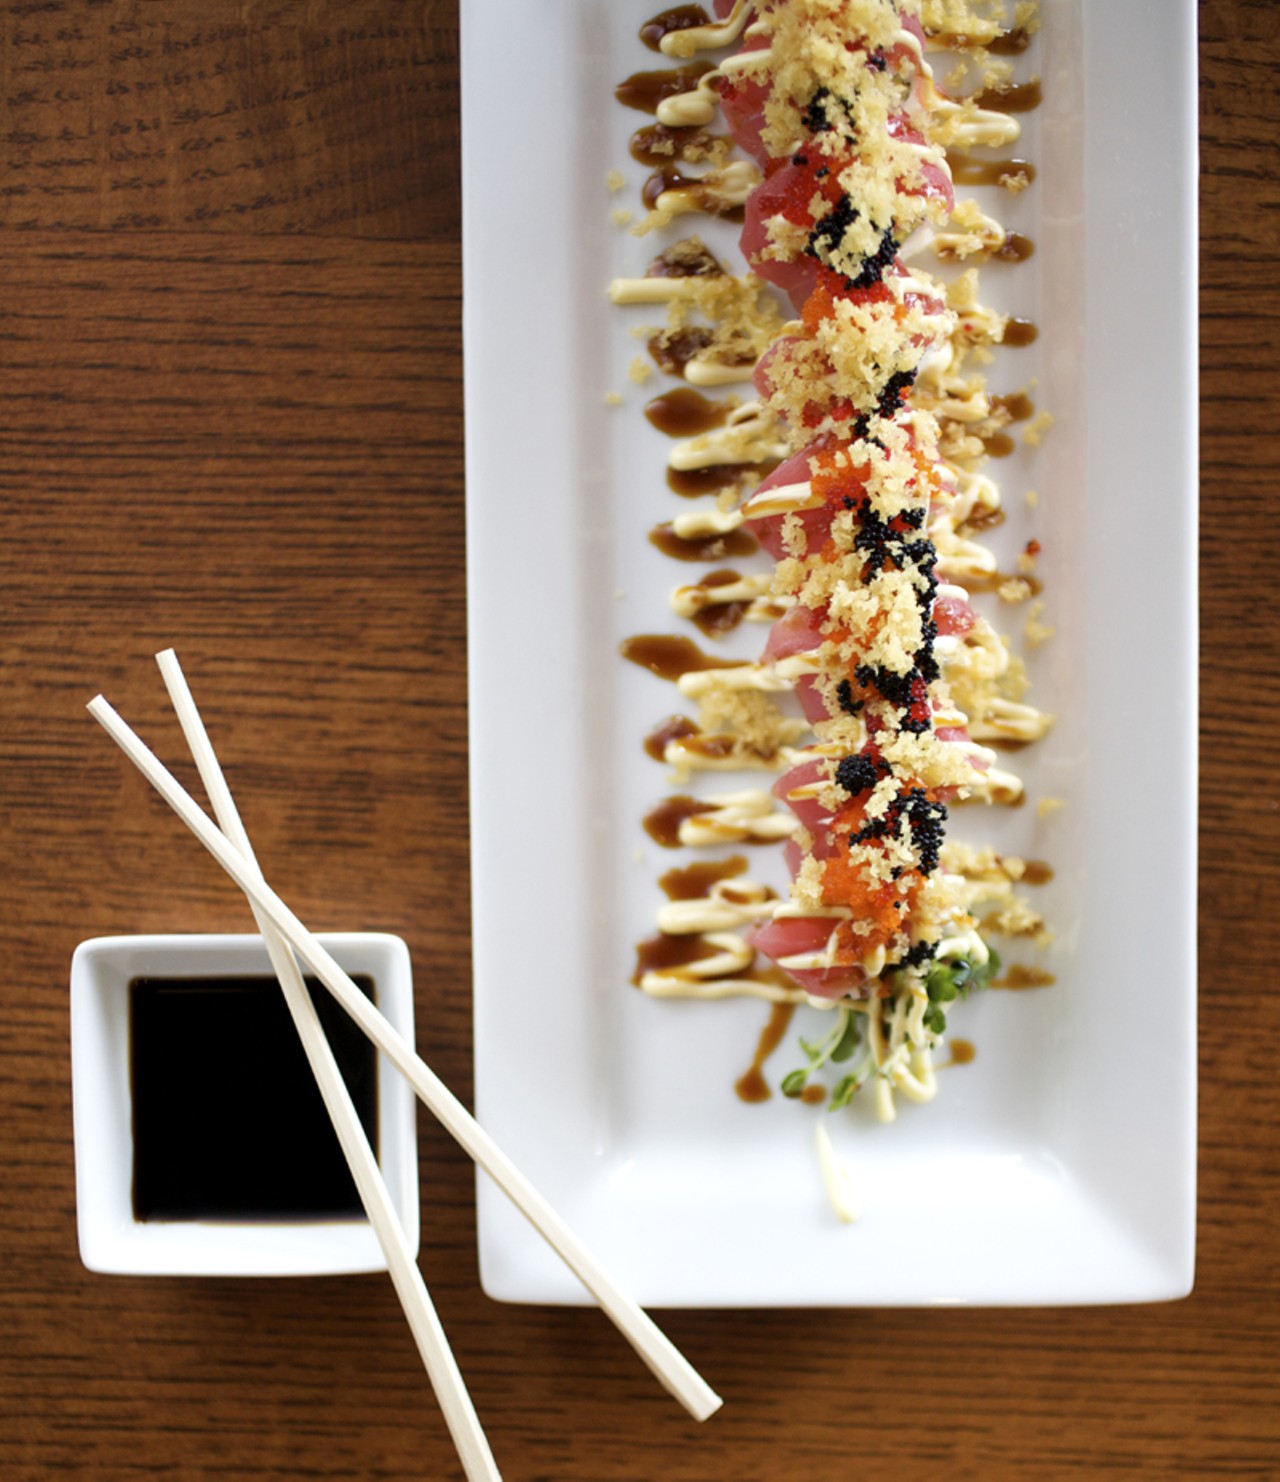 The Red Dragon Roll is a spicy tuna roll topped with tuna, smelt eggs and teriyaki sauce.